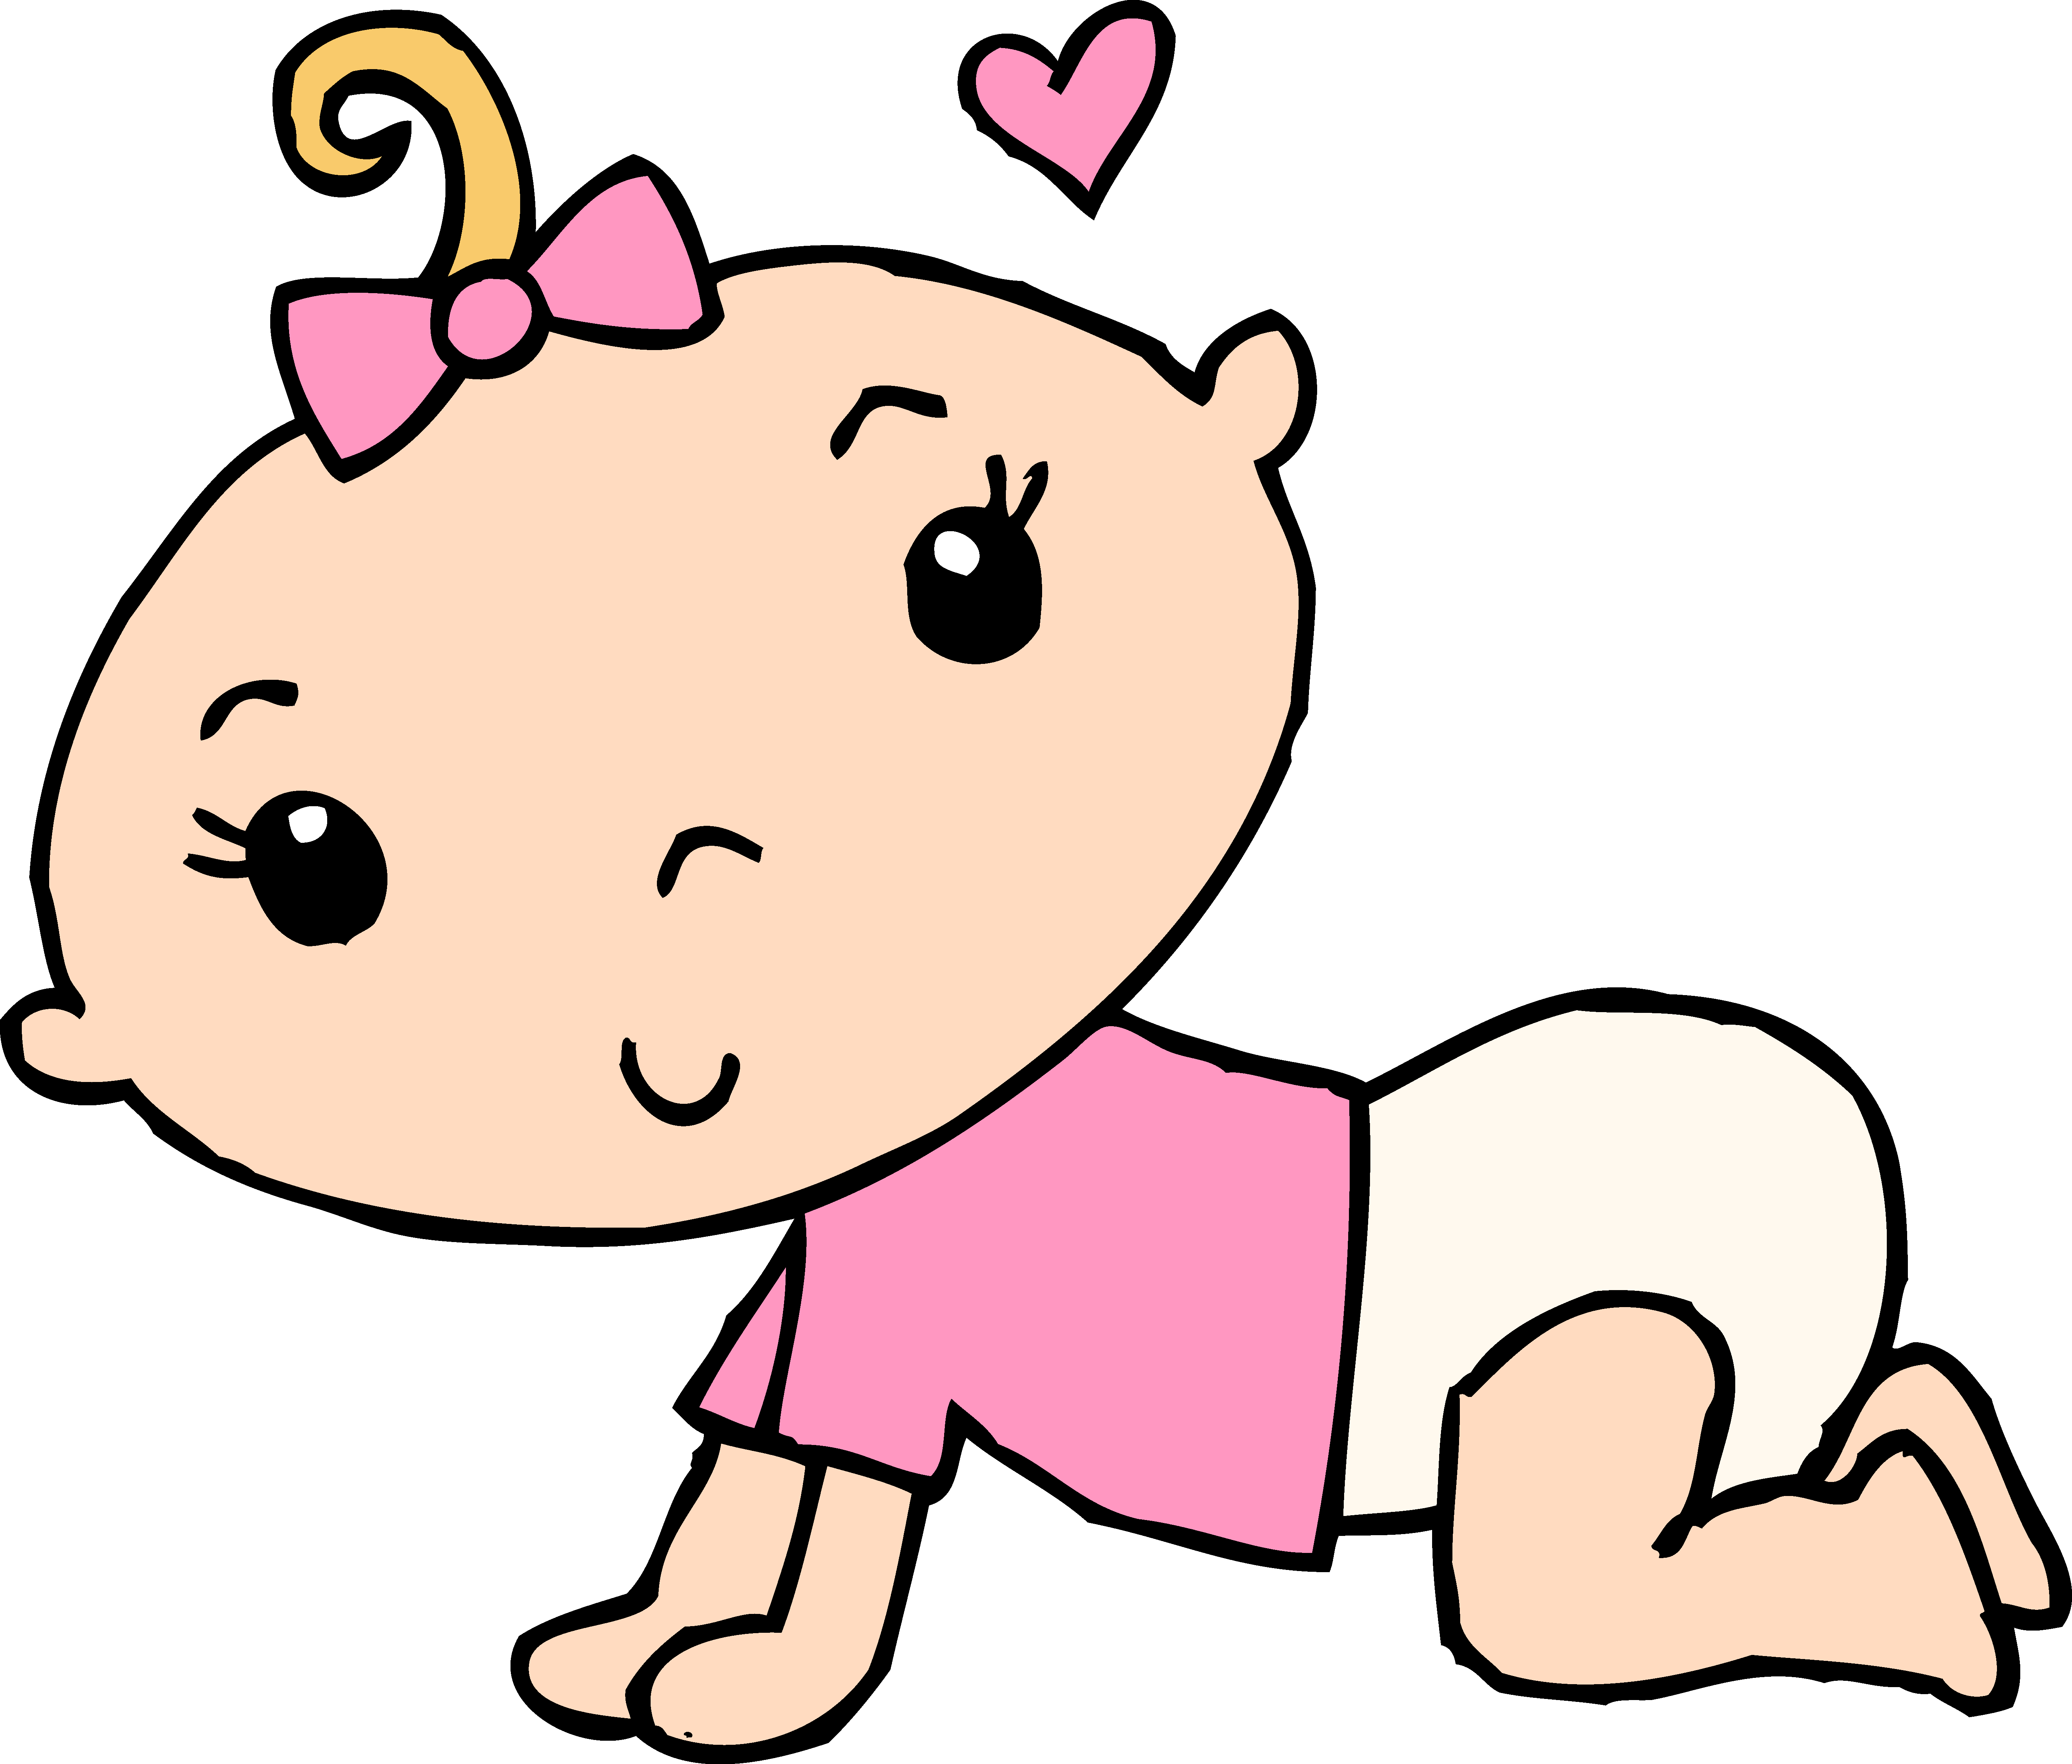 Baby Image Clip Art - Baby Clipart Images